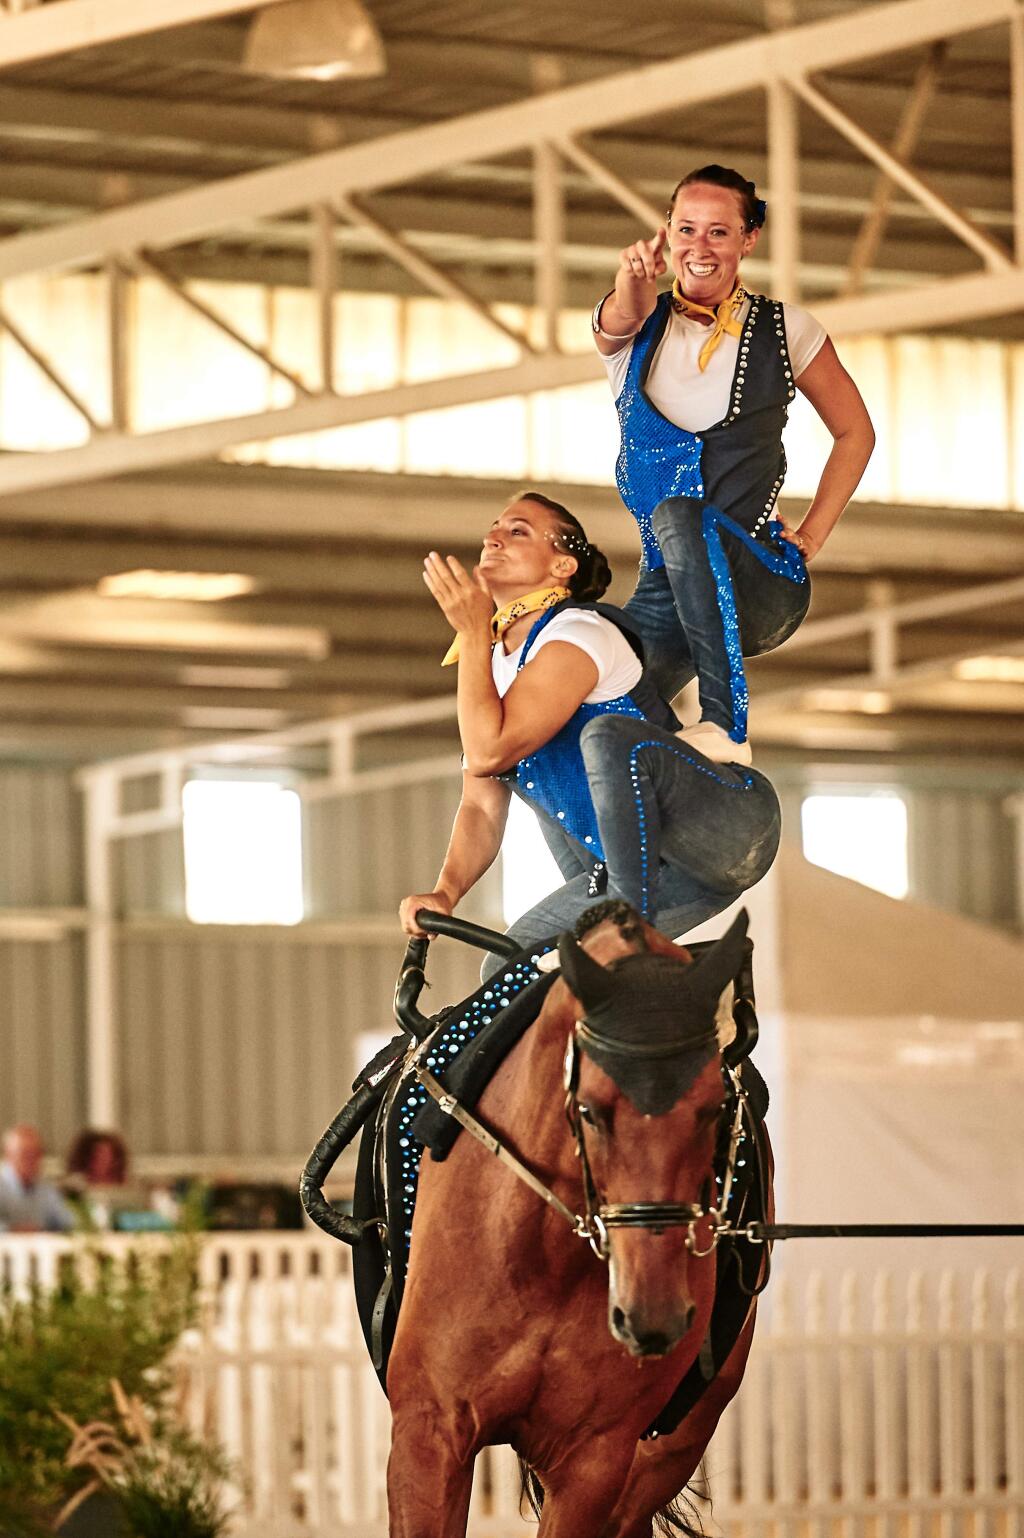 Katie Keville, top, and Florence Rubinger, a Santa Rosa native, will be competing today at the World Equestrian Games in North Carolina. (COURTESY OF FLORENCE RUBINGER)